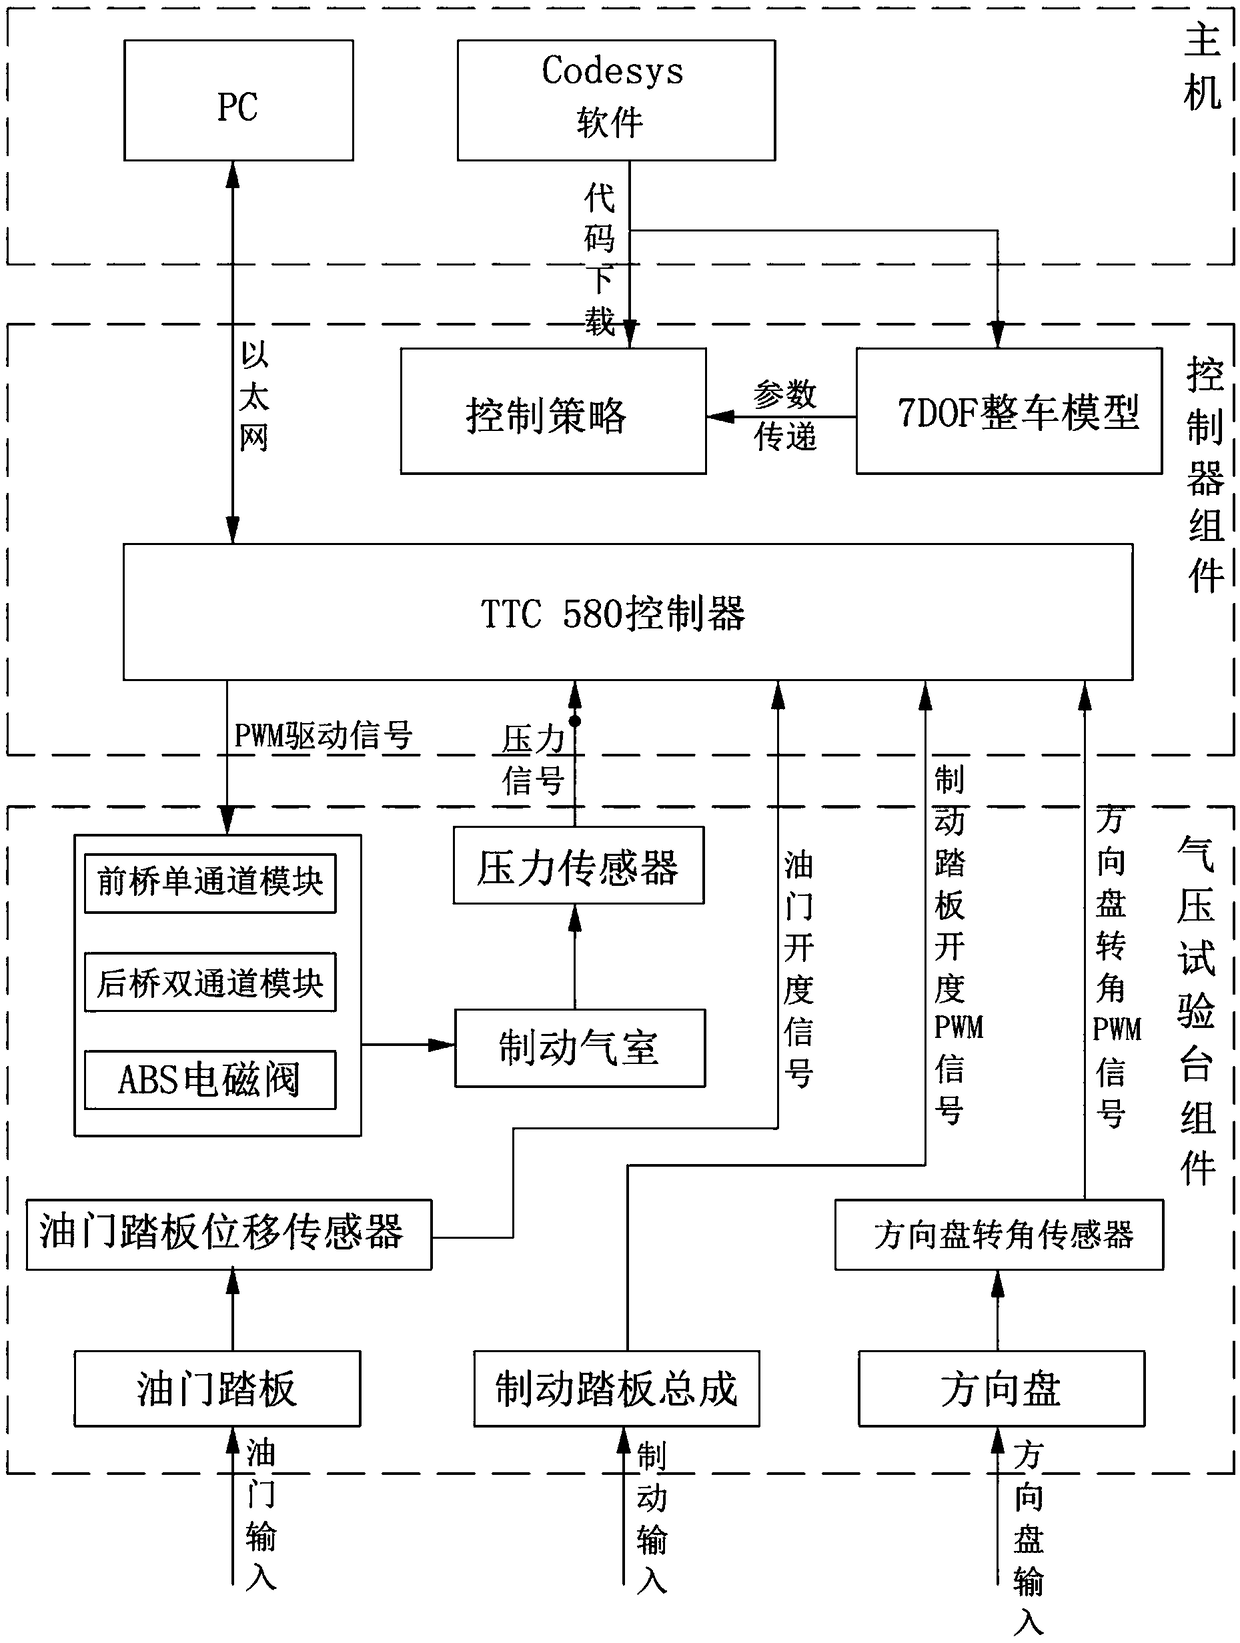 Hardware-in-the-loop test bench and test method for commercial vehicle electronic braking system based on ttc580 controller